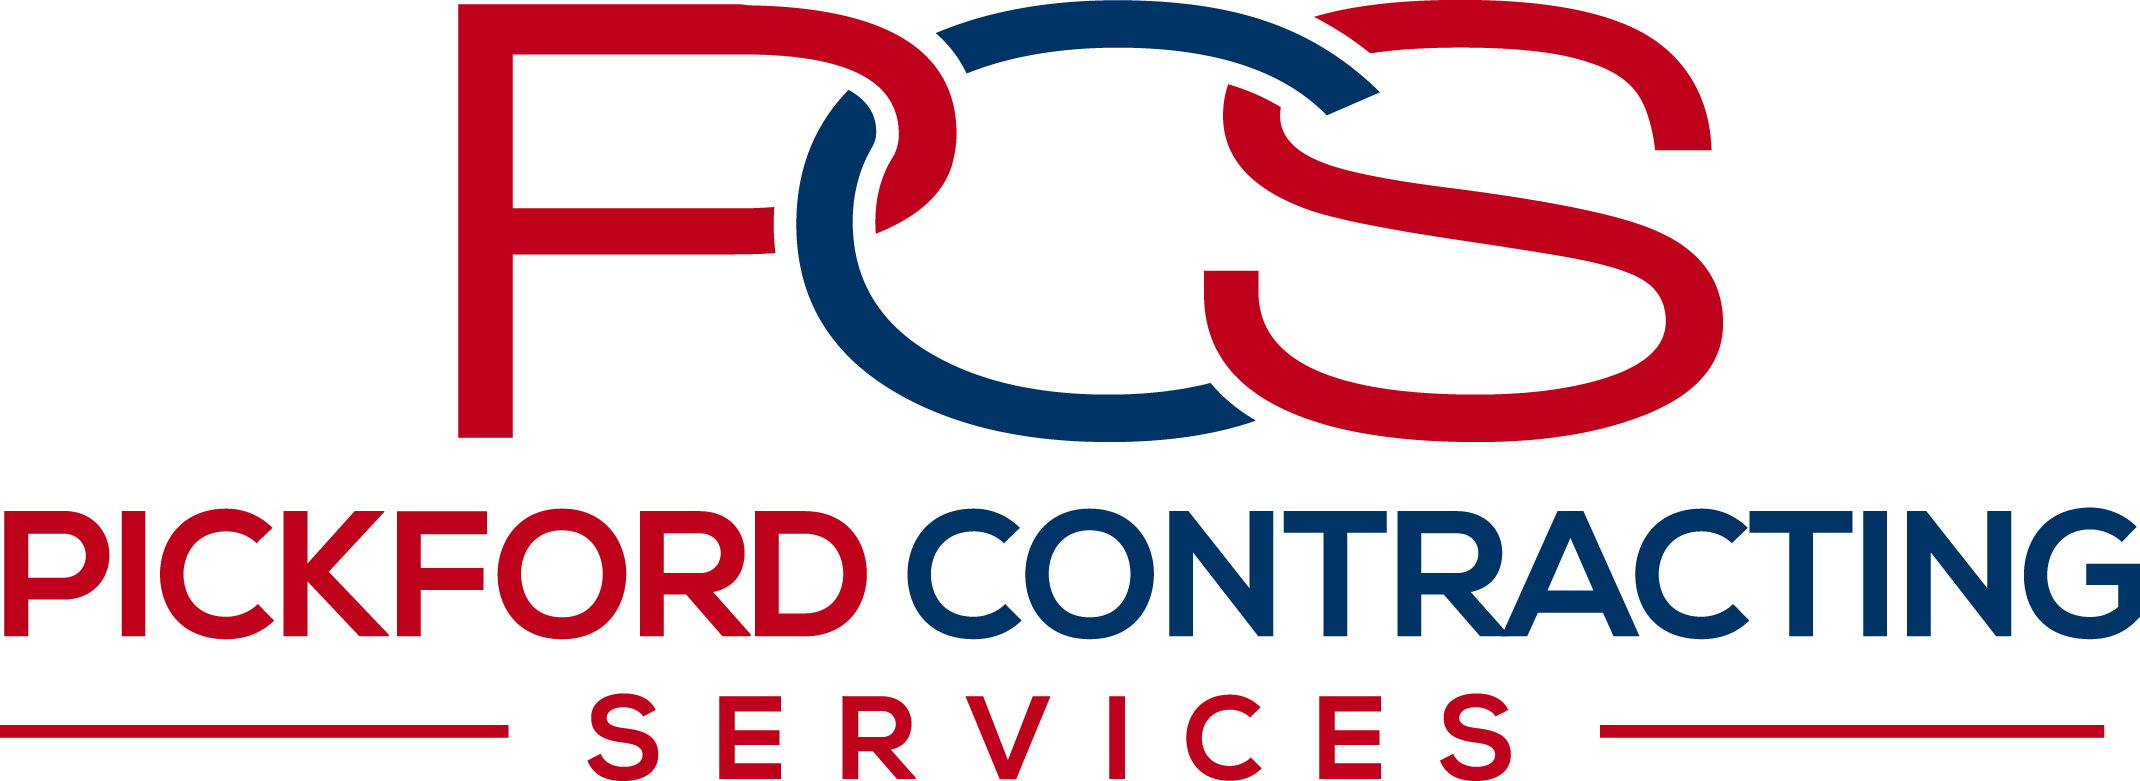 Pickford Contracting Services, Inc. Logo